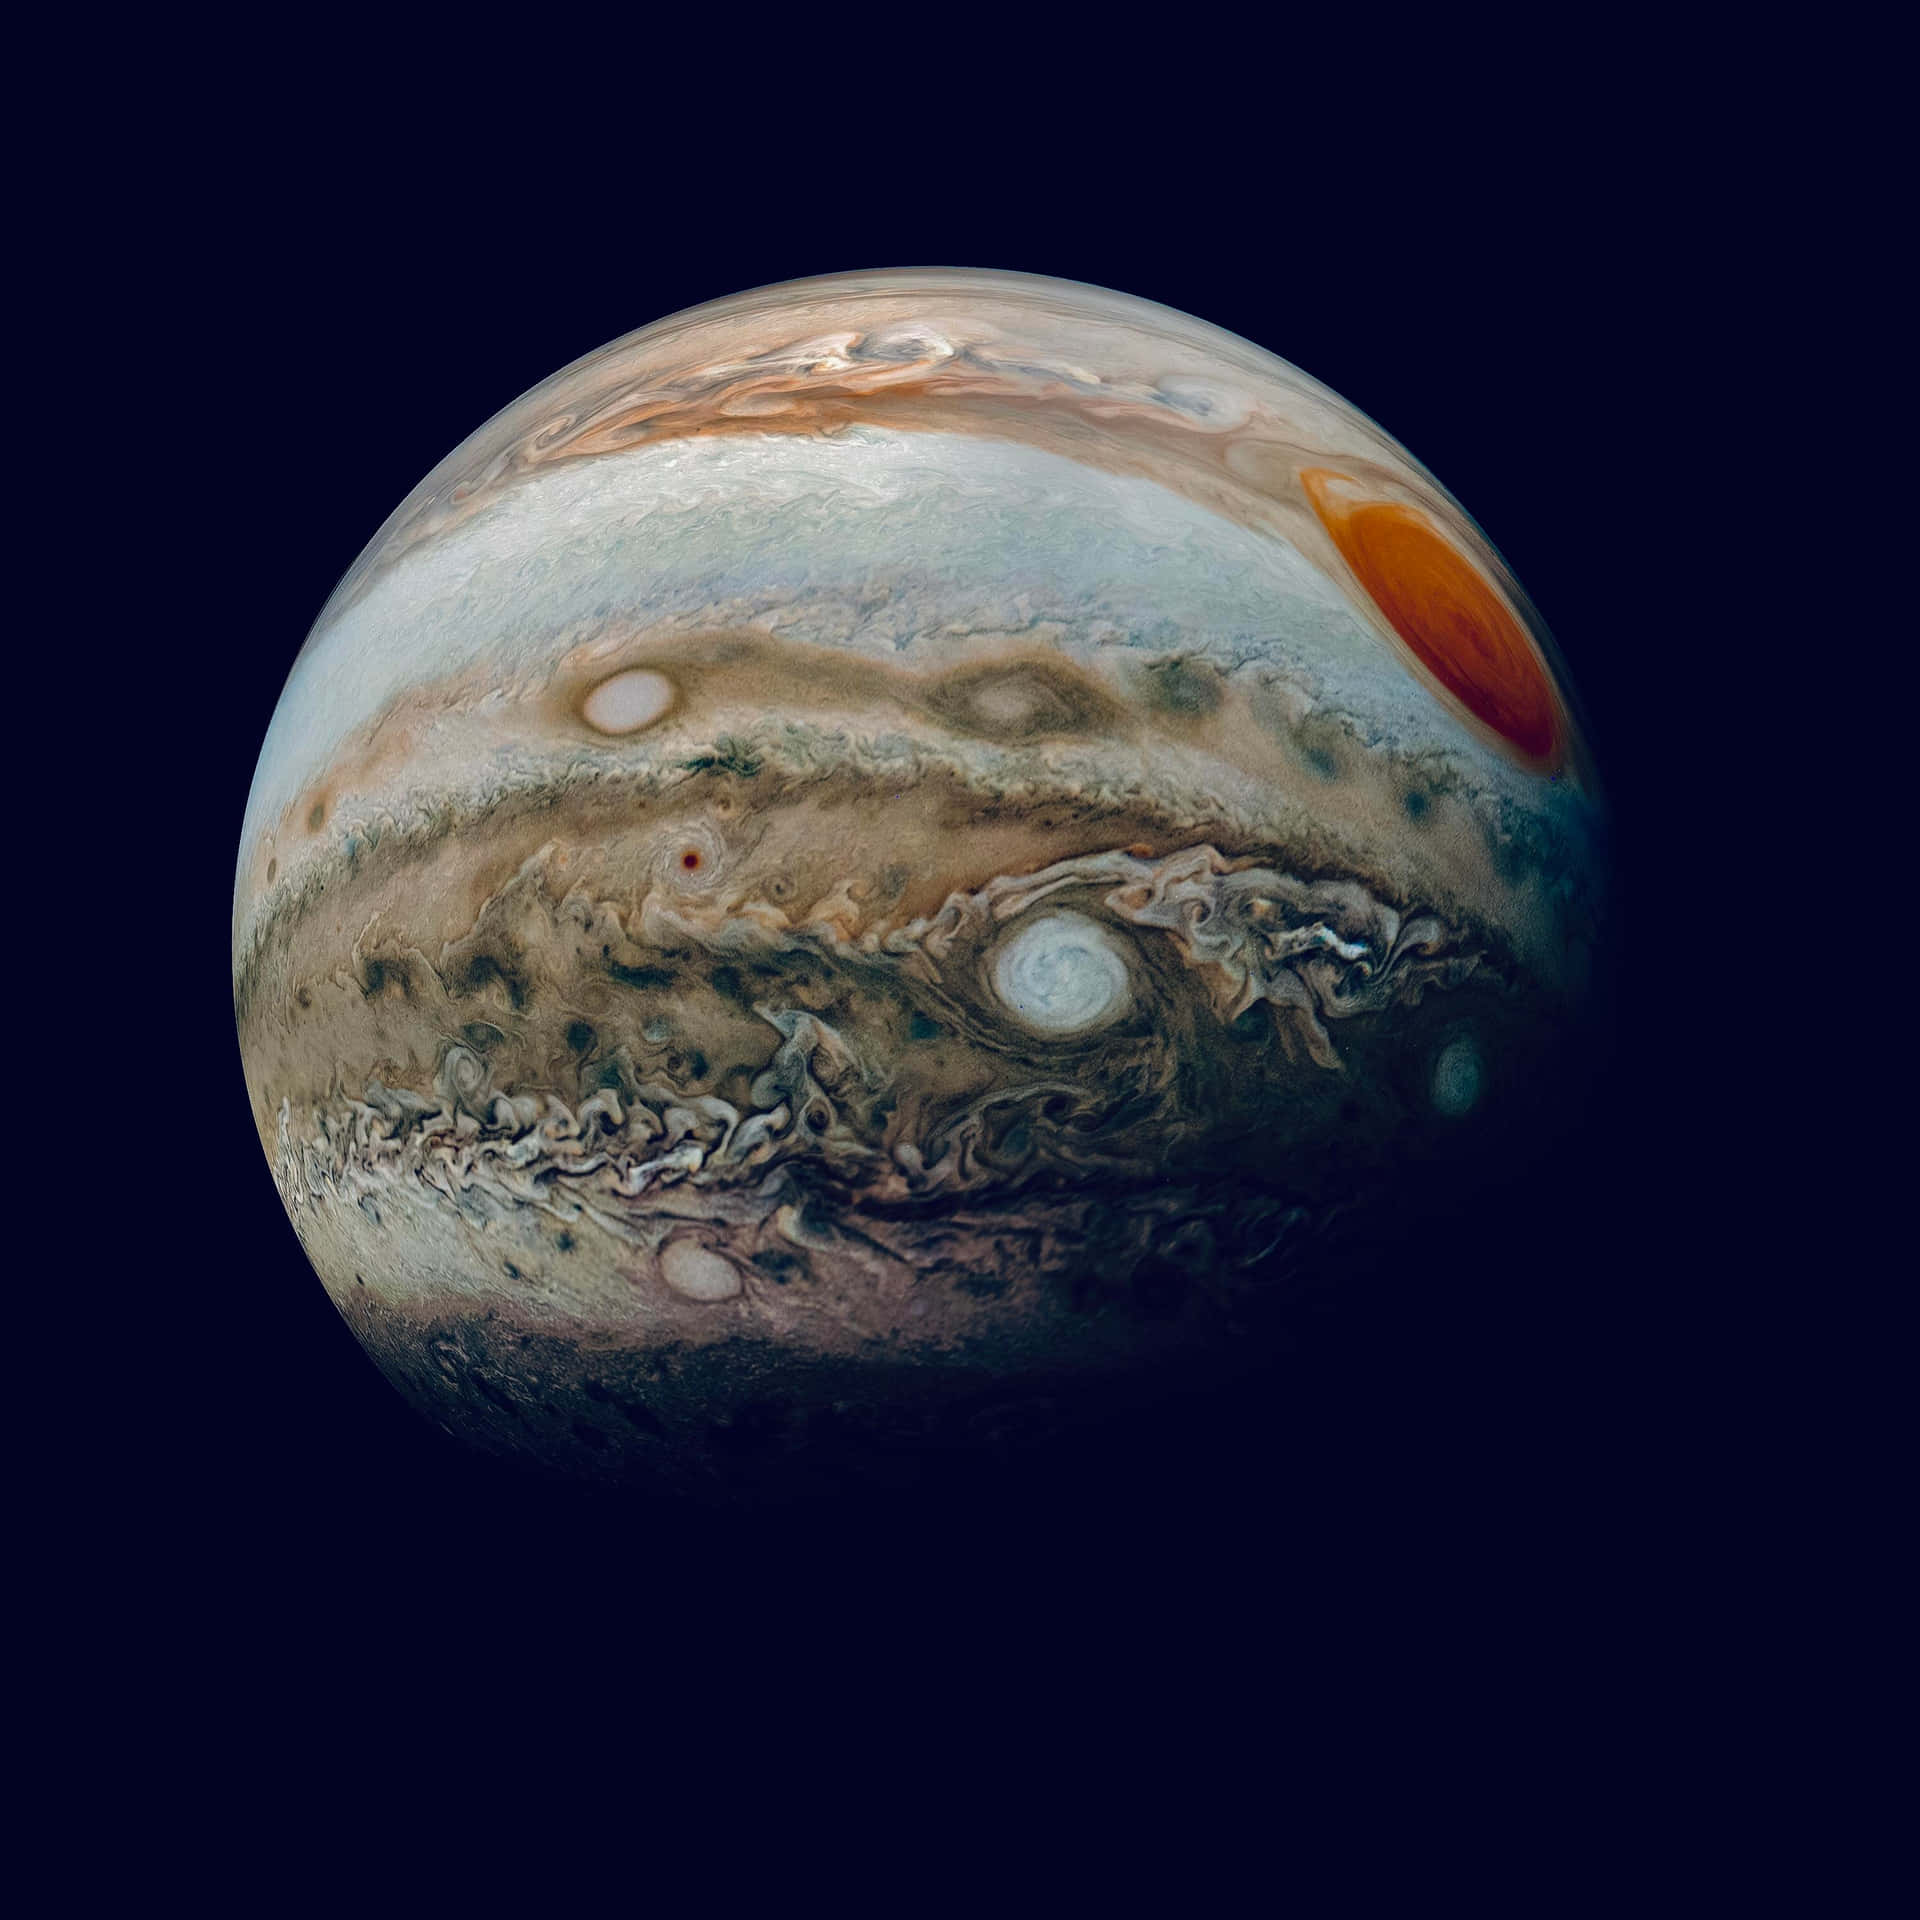 A stunning image of Jupiter and its swirling clouds